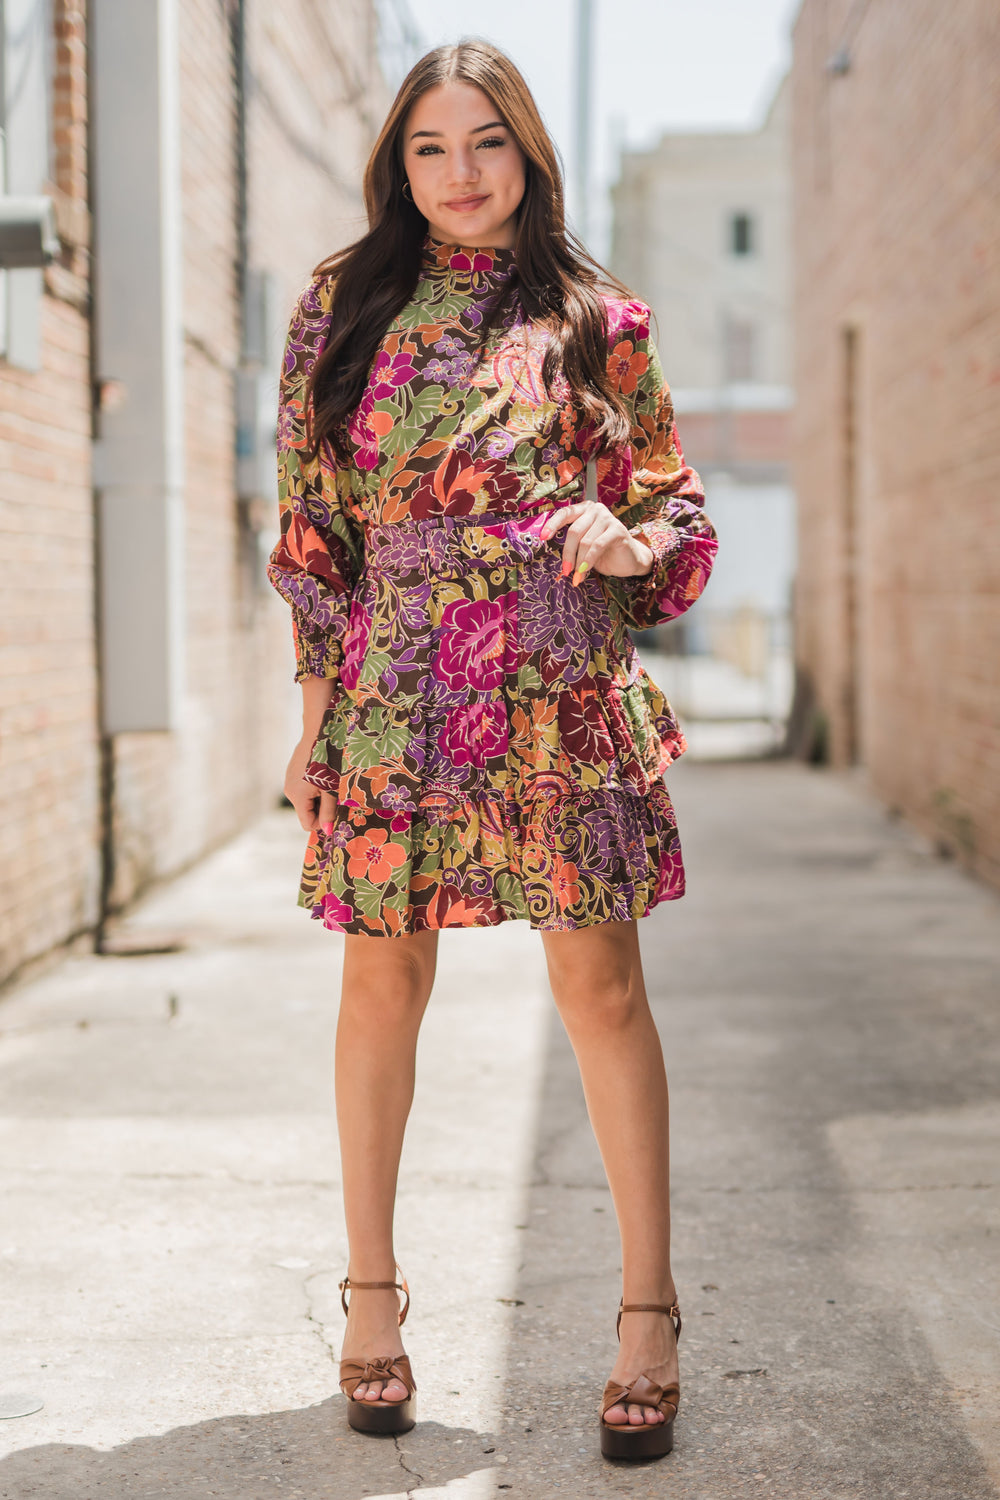 Autumn Moon Ruffle Dress-Dresses-Bloom West Boutique-Shop with Bloom West Boutique, Women's Fashion Boutique, Located in Houma, Louisiana